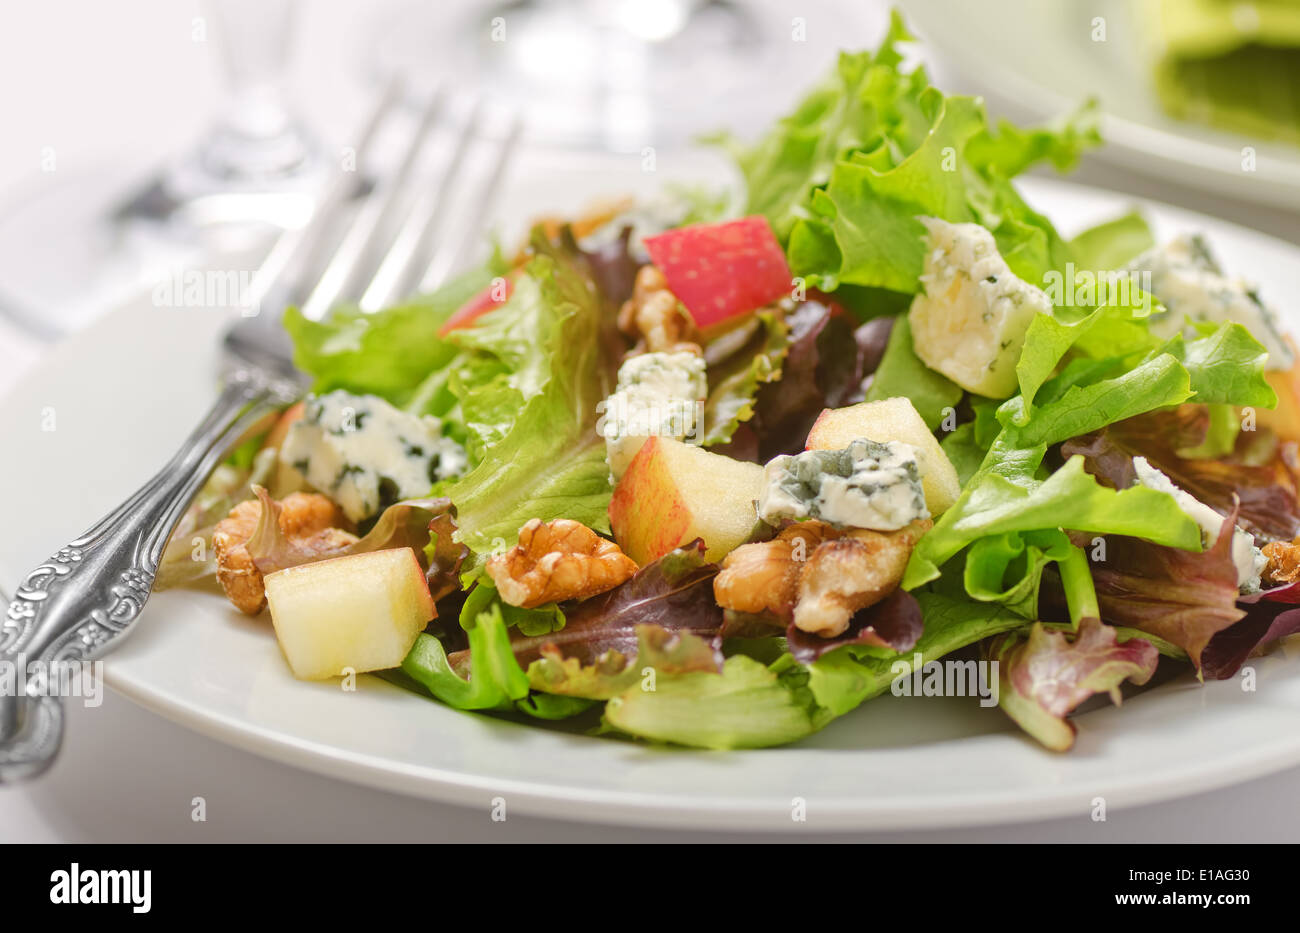 Waldorf salad with greens, apples, walnuts, and blue cheese. Stock Photo